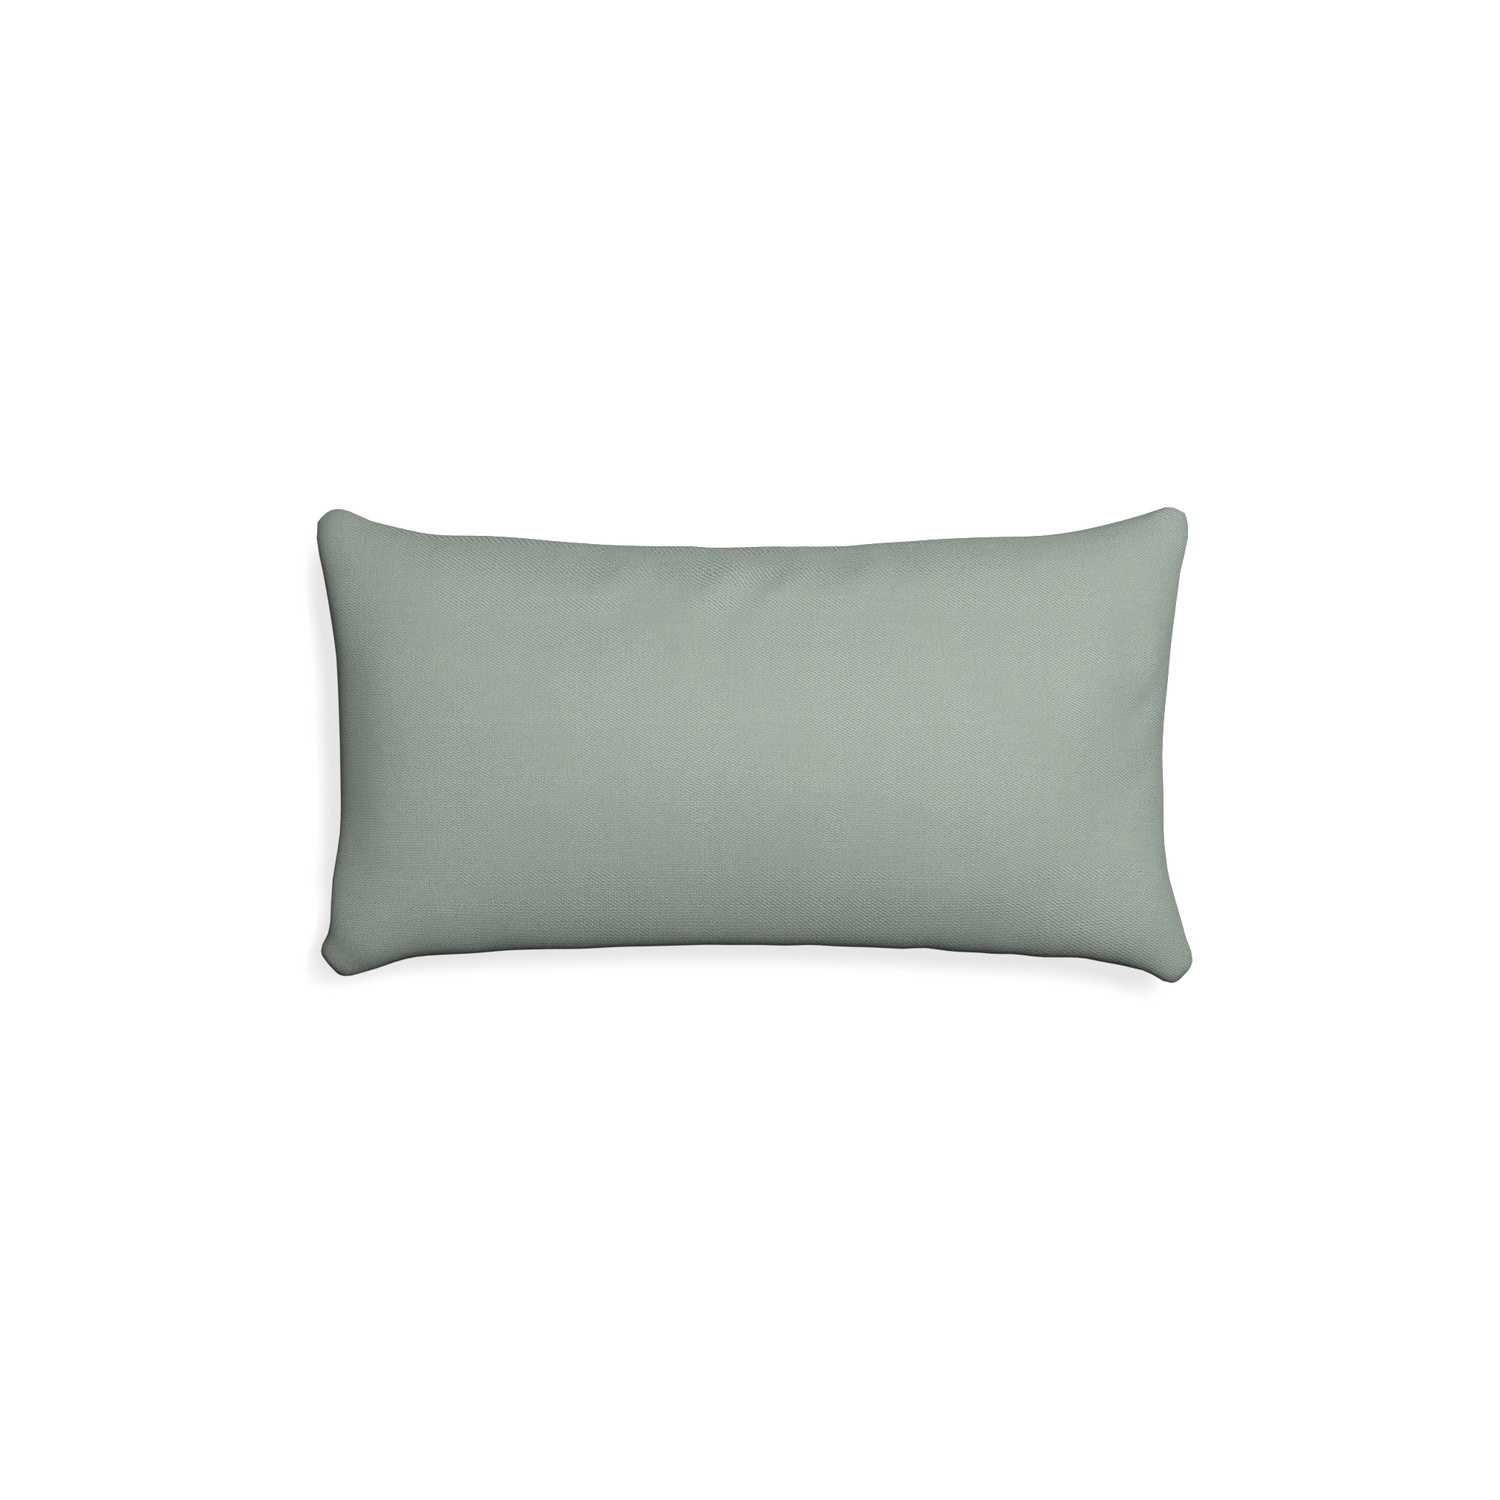 Petite-lumbar sage custom sage green cottonpillow with none on white background